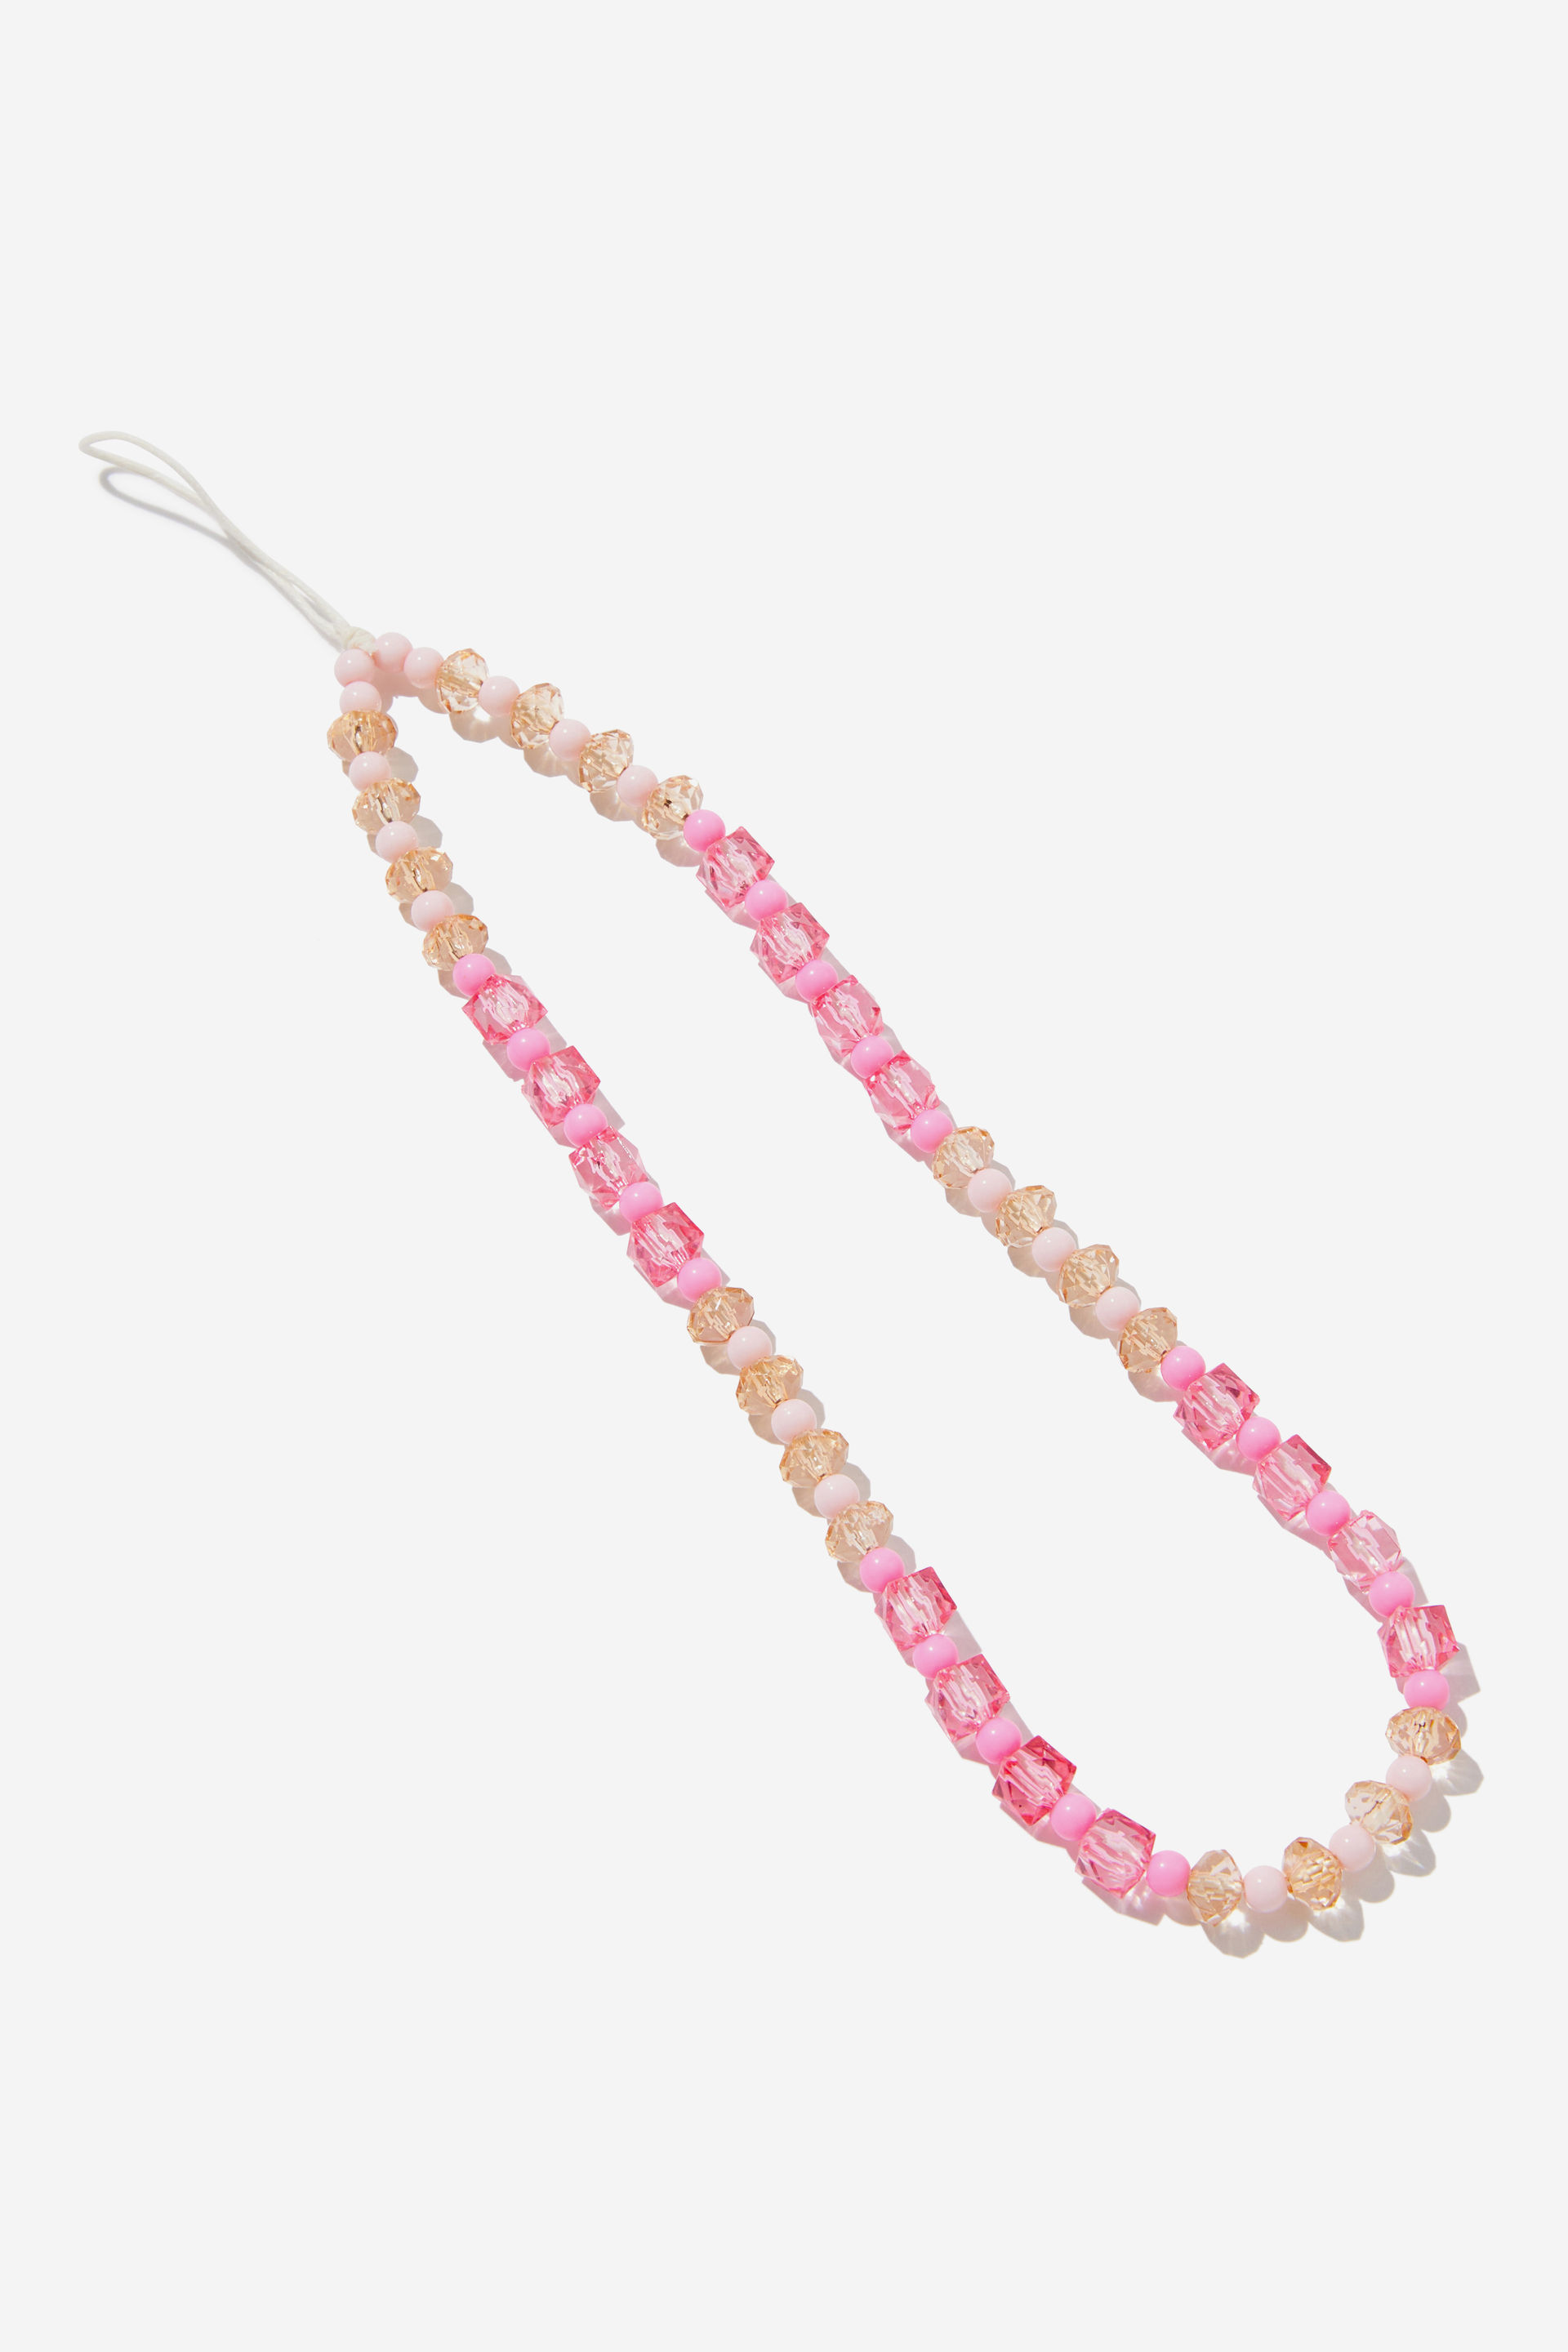 Typo - Carried Away Phone Charm Strap - Pink / gem